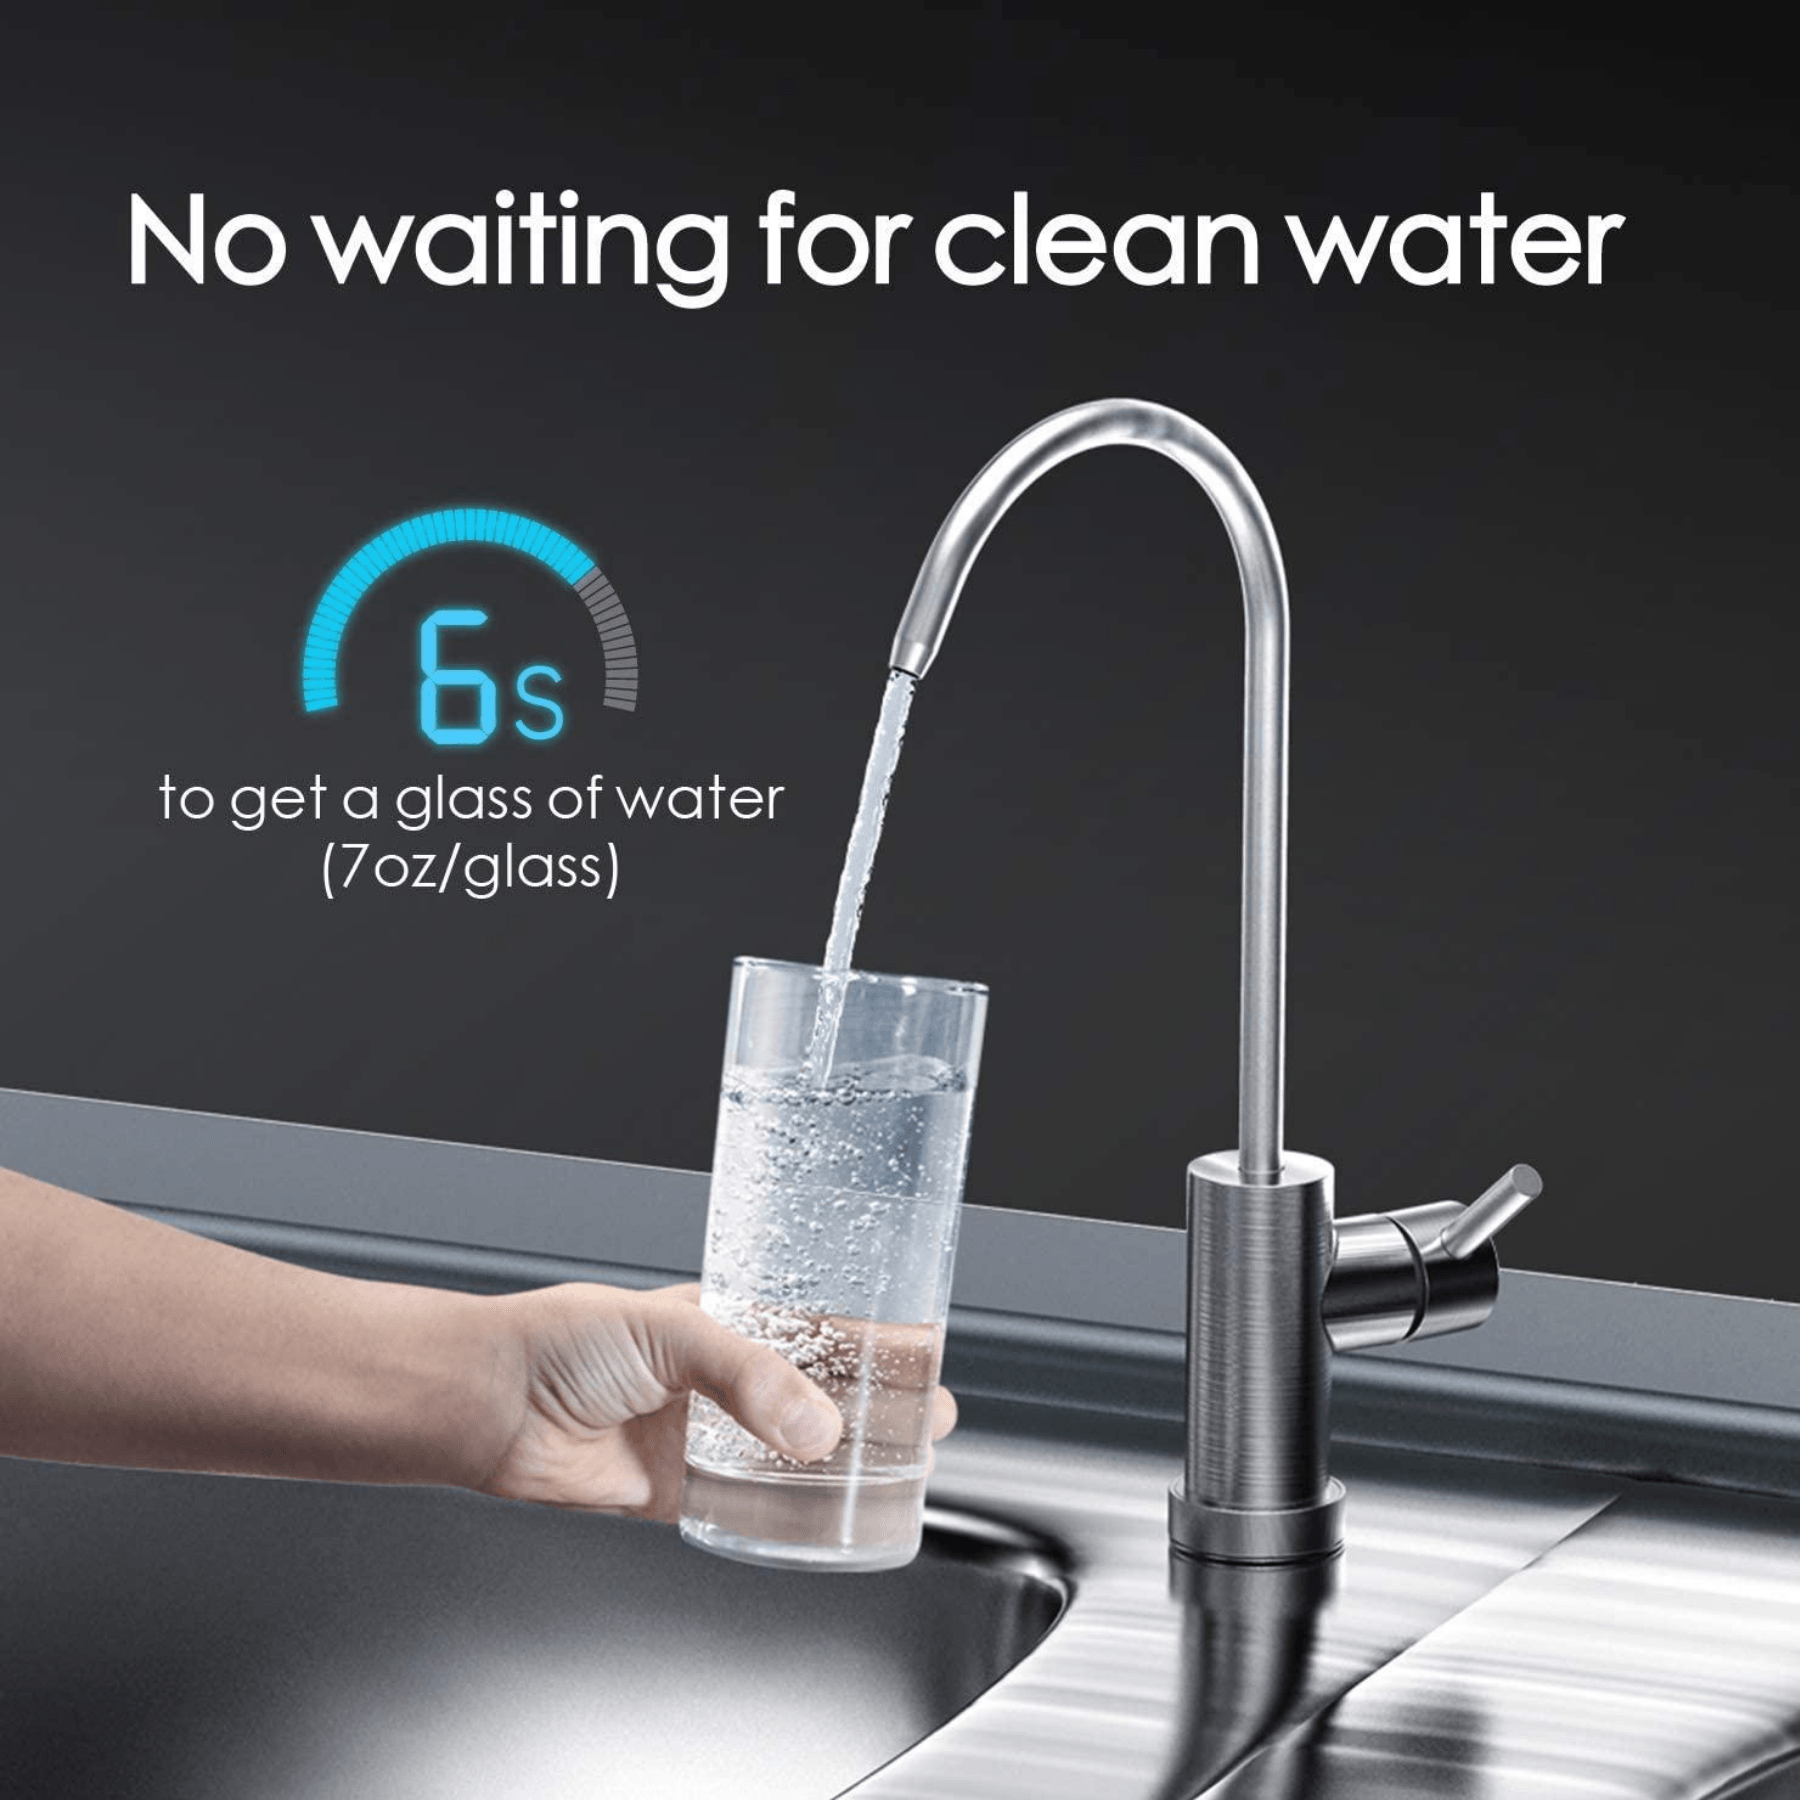 WaterDrop Under Sink Integrated Dual Carbon Filtration System